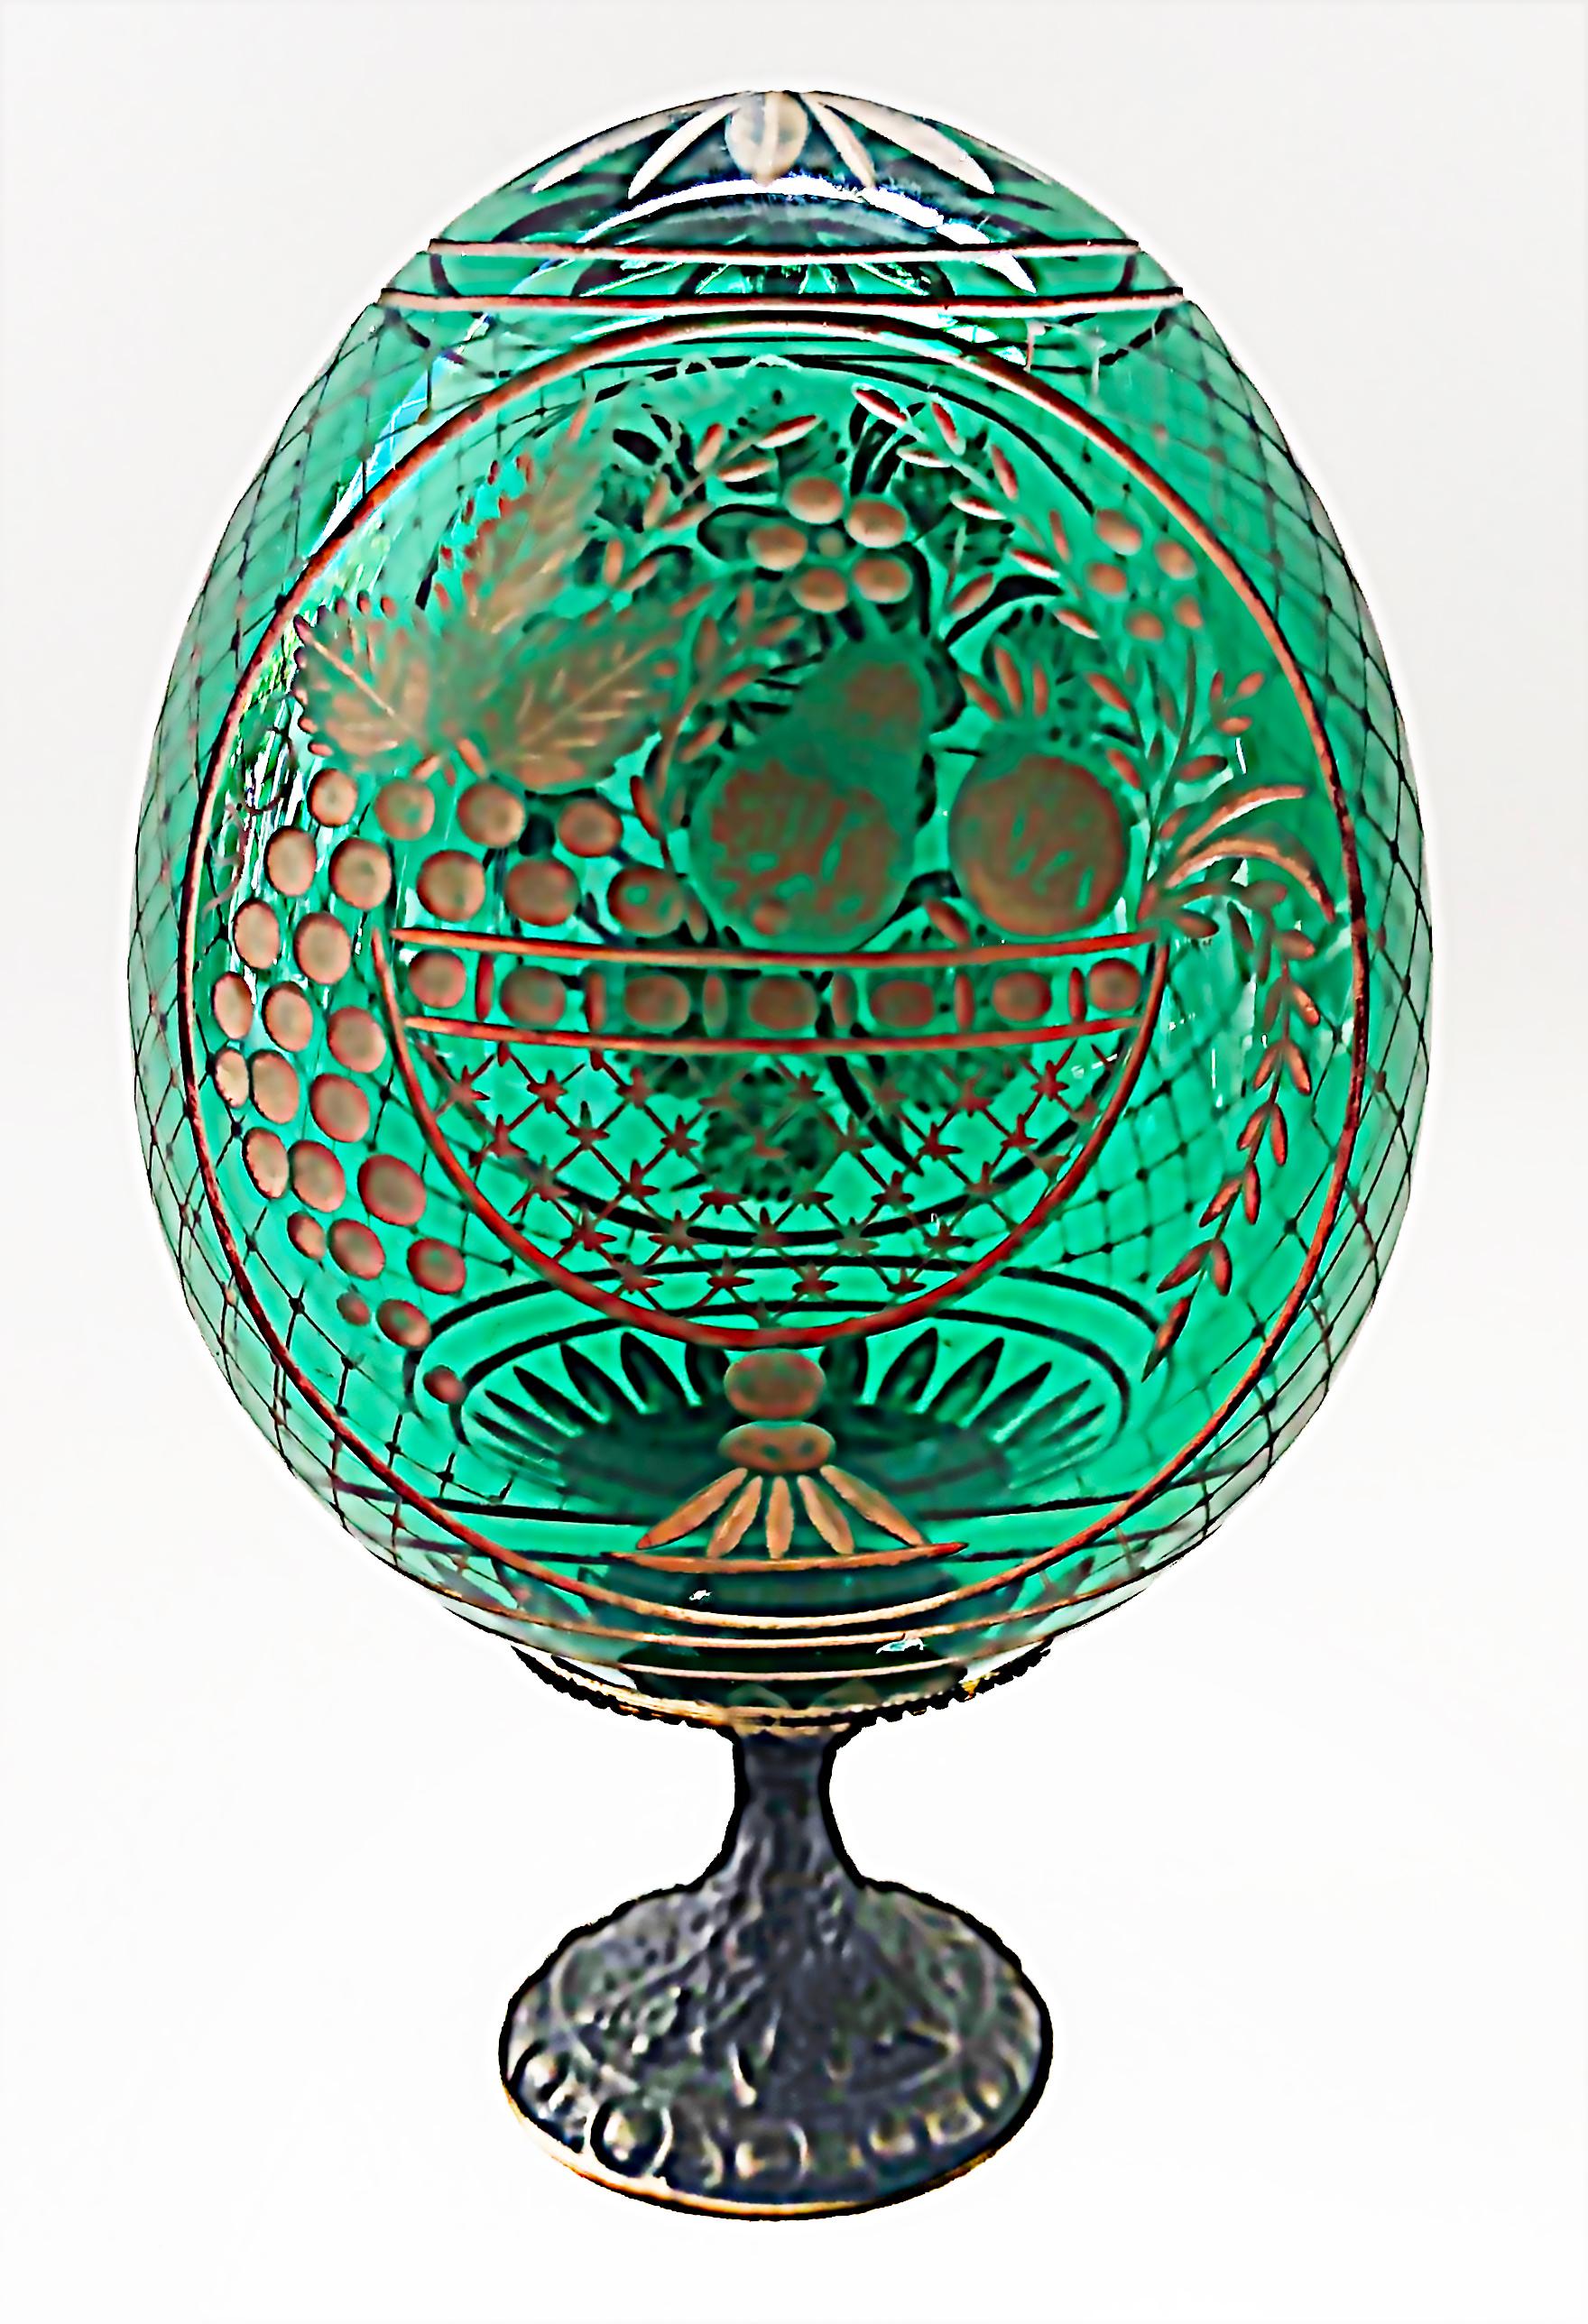 Antique Russian Floral Cut crystal egg on brass stand

Offered for sale is an antique green crystal egg decorated on the sides with cut and gilt floral and fruit bowl motifs. There are lattice cut patterns on the sides and a gilt starburst design